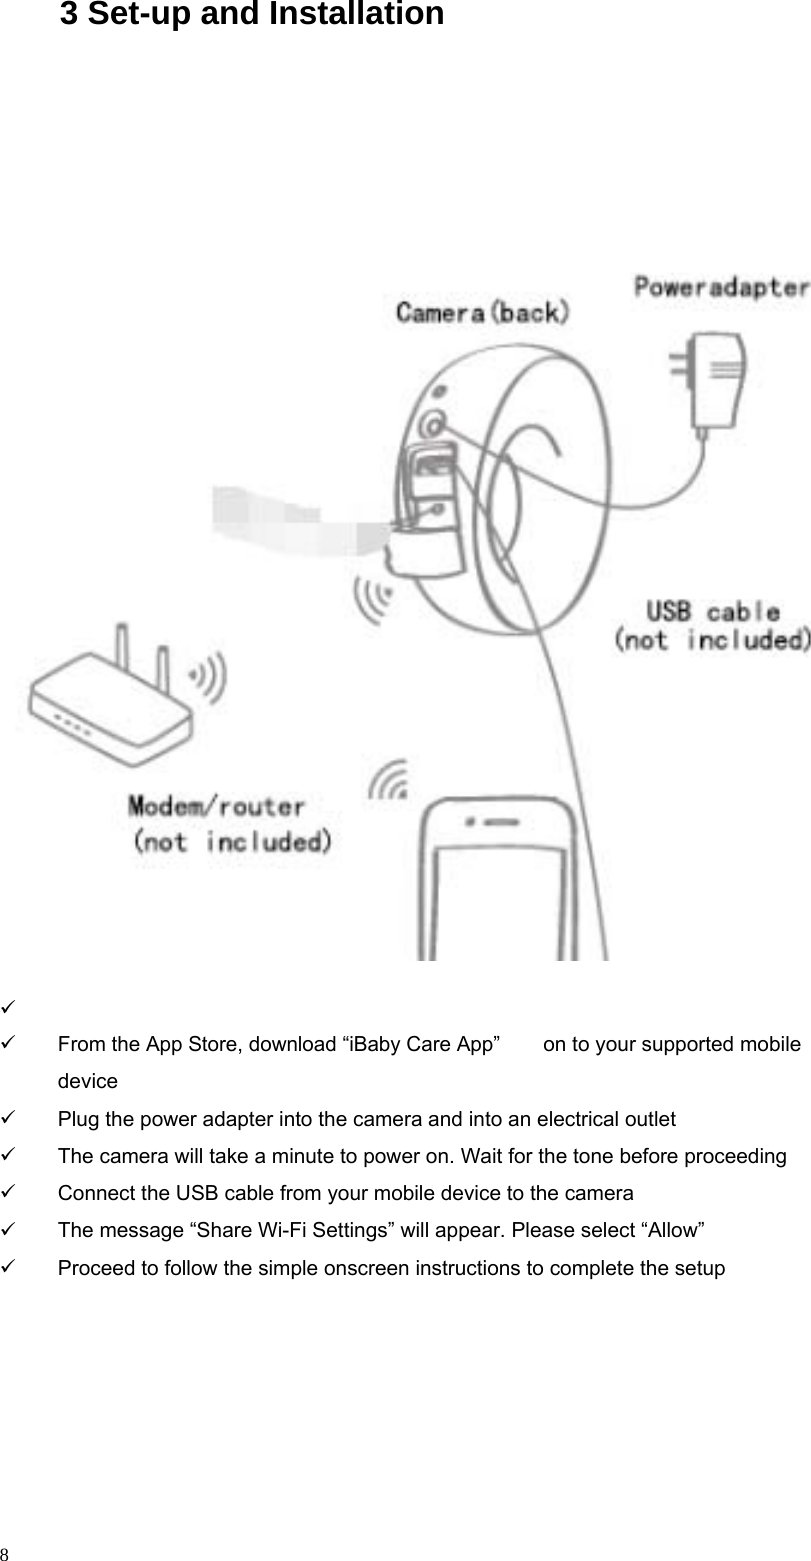                                                    3 Set-up and Installation                                          From the App Store, download “iBaby Care App” device on to your supported mobile           8 Plug the power adapter into the camera and into an electrical outlet The camera will take a minute to power on. Wait for the tone before proceeding Connect the USB cable from your mobile device to the camera The message “Share Wi-Fi Settings” will appear. Please select “Allow” Proceed to follow the simple onscreen instructions to complete the setup